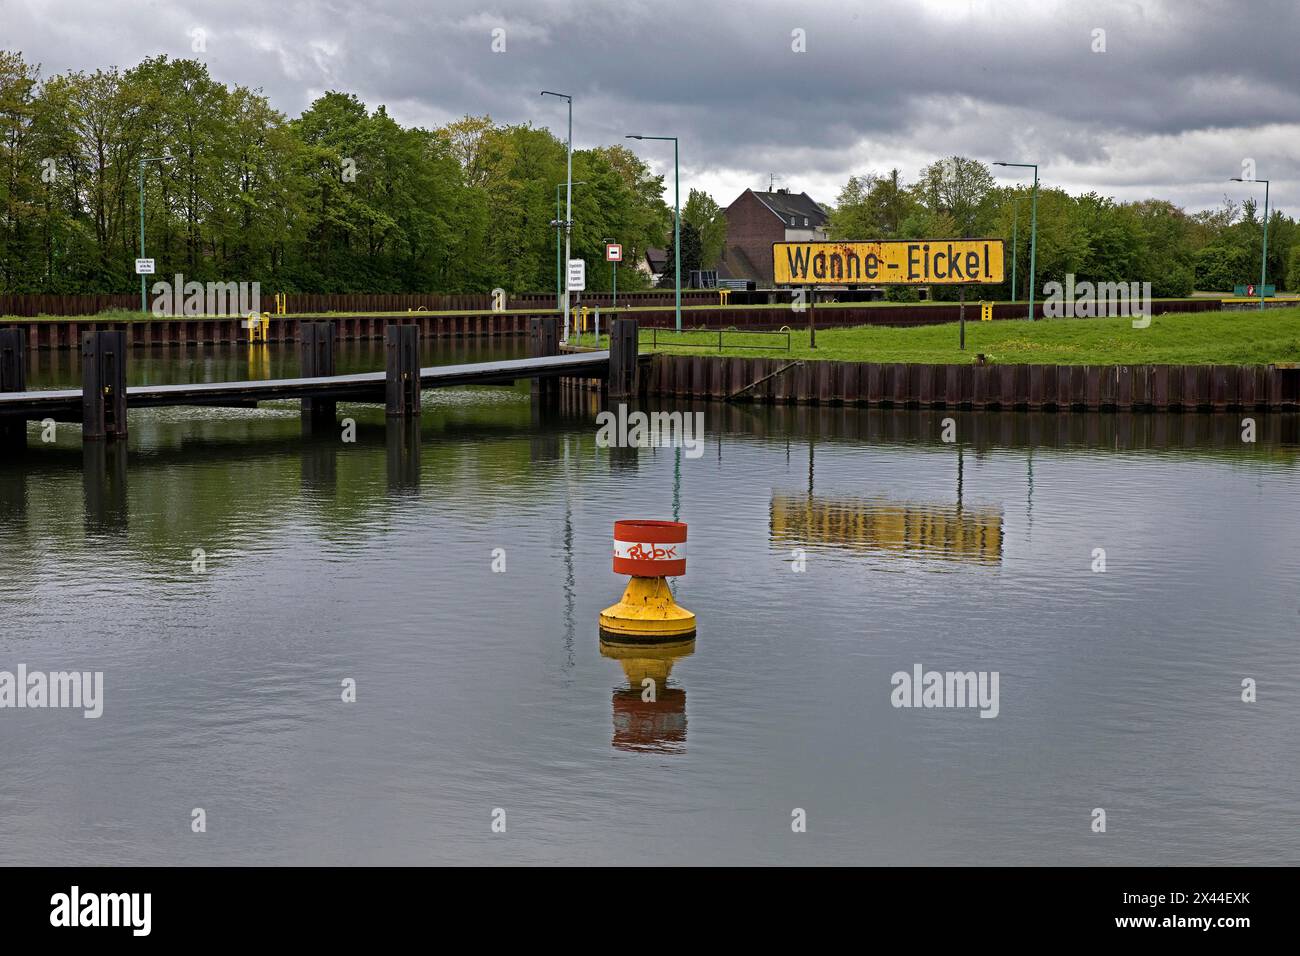 Headwater of the Wanne-Eickel lock system, New South Lock, Rhine-Herne Canal, Herne, North Rhine-Westphalia, Ruhr area, Germany Stock Photo